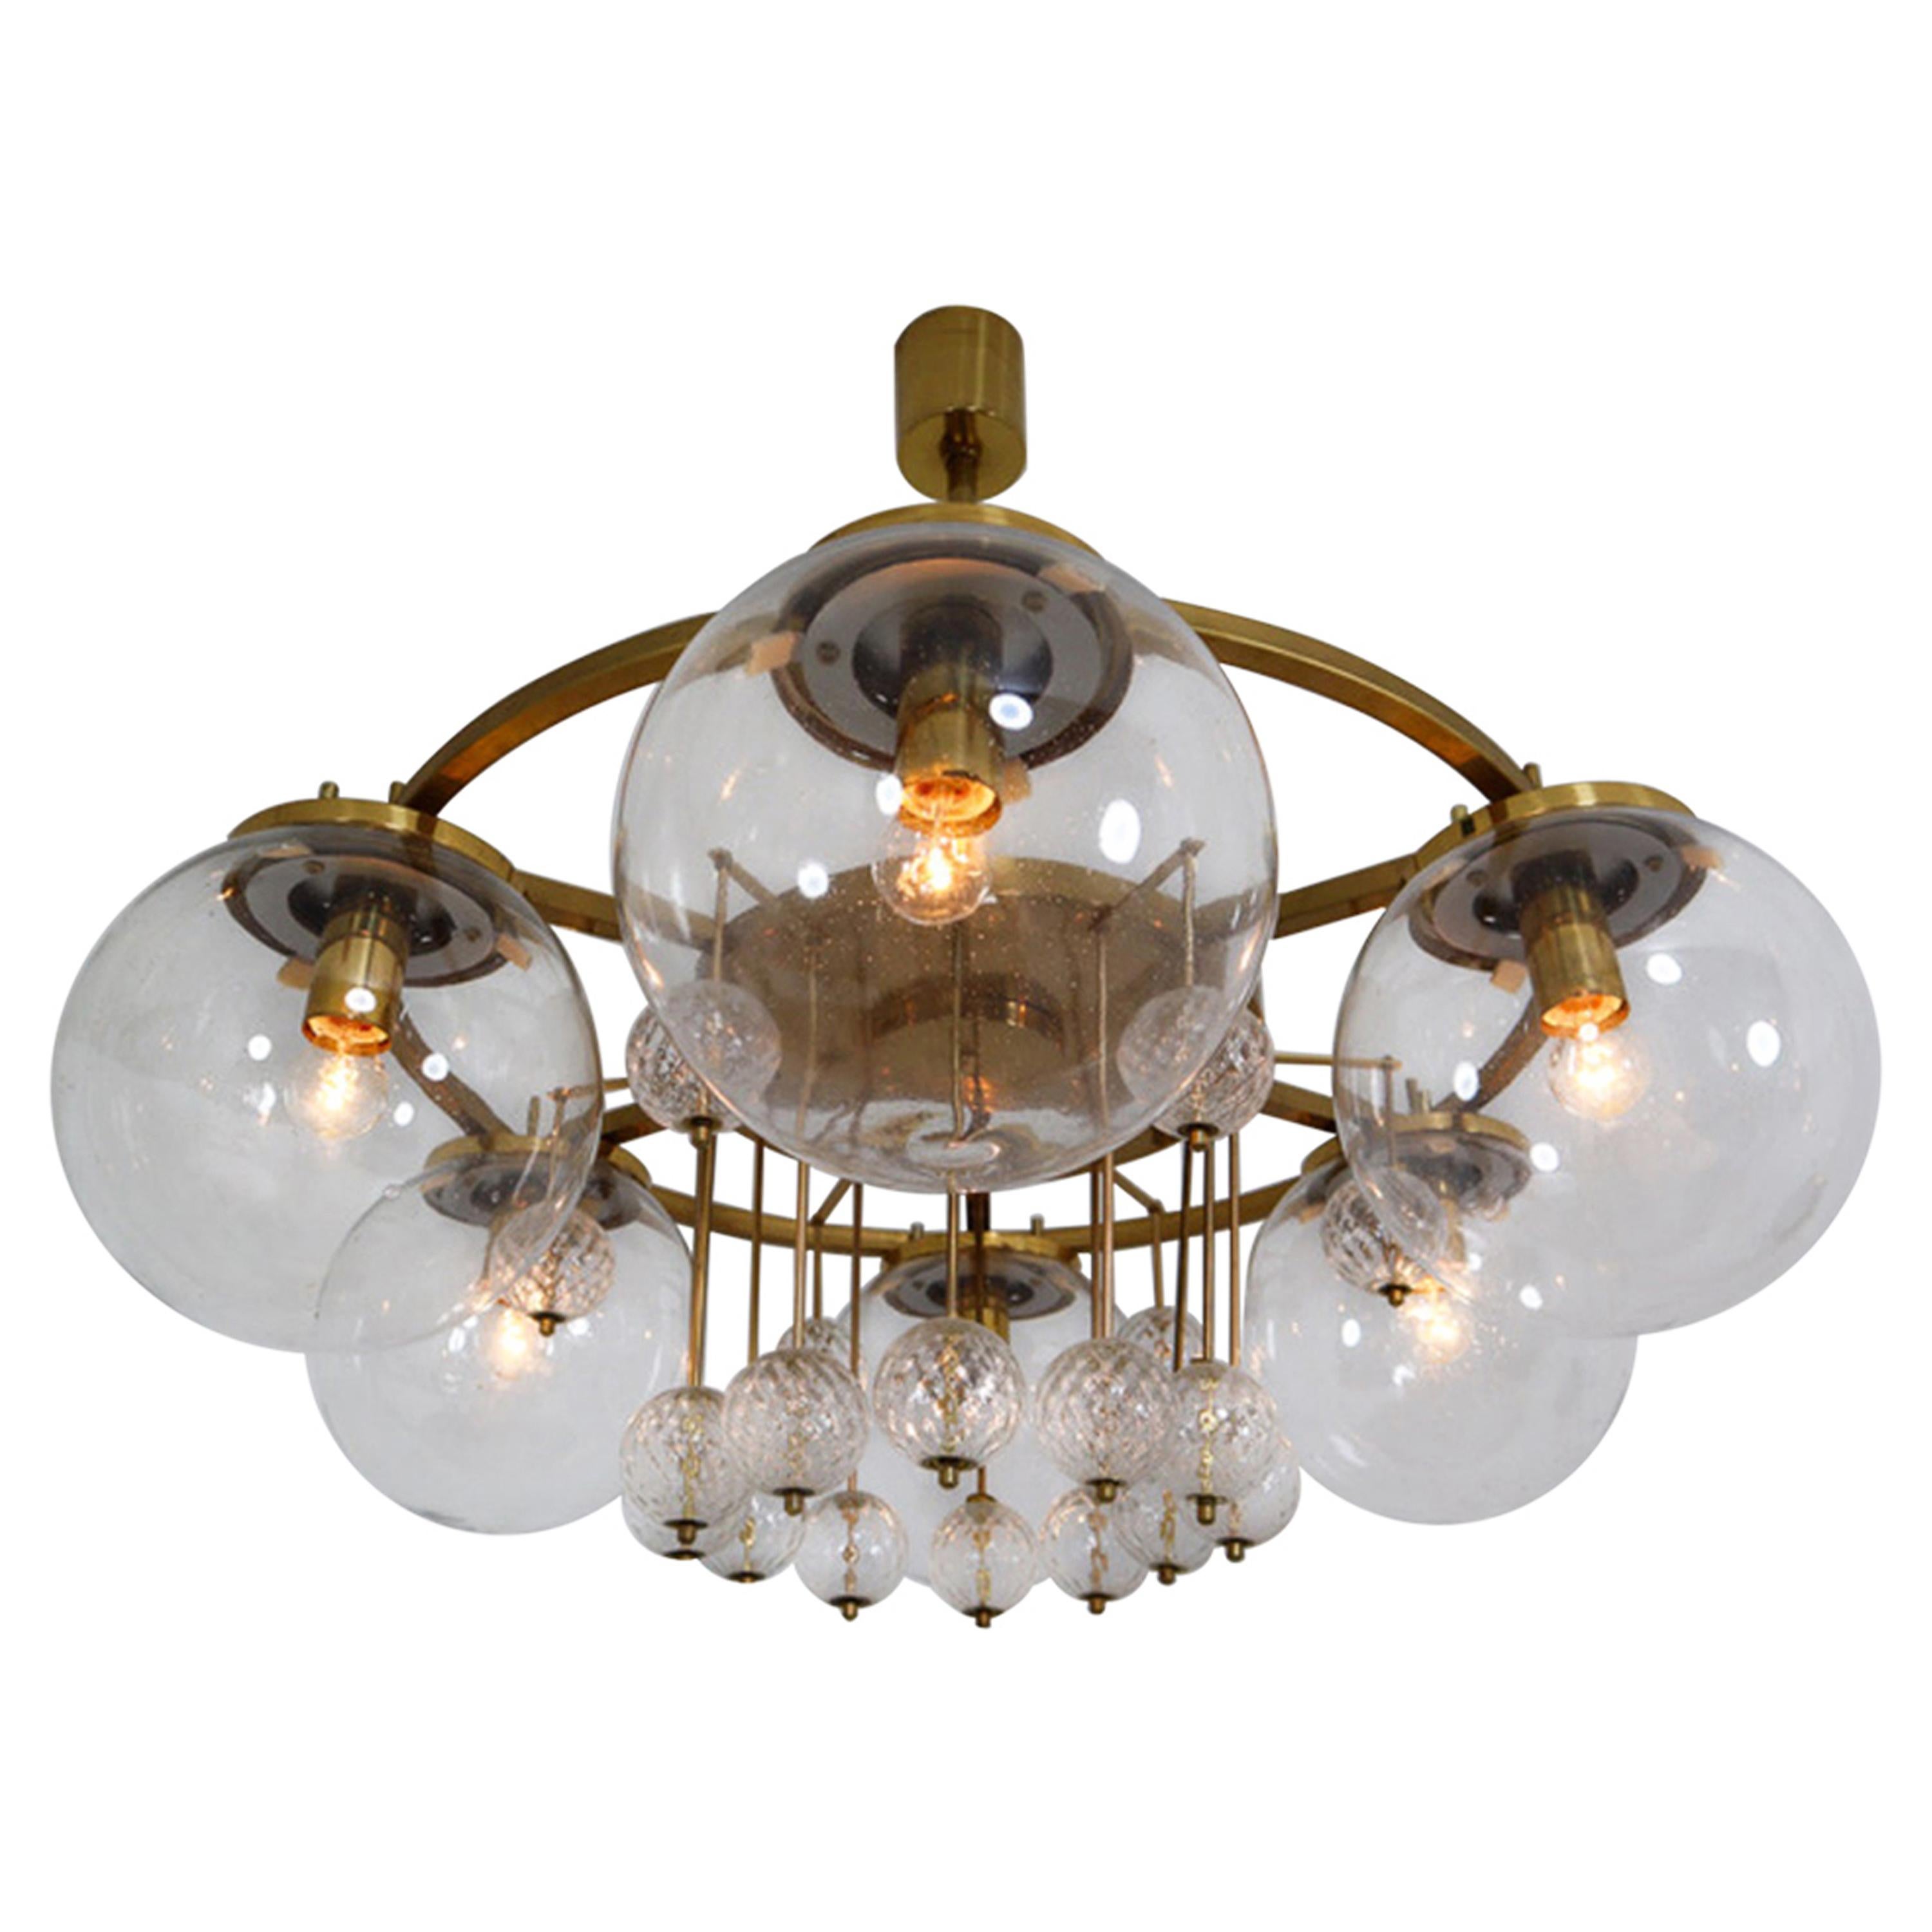  Large Hotel Chandelier in Brass and Hand Blown Glass, Europe, 1970s